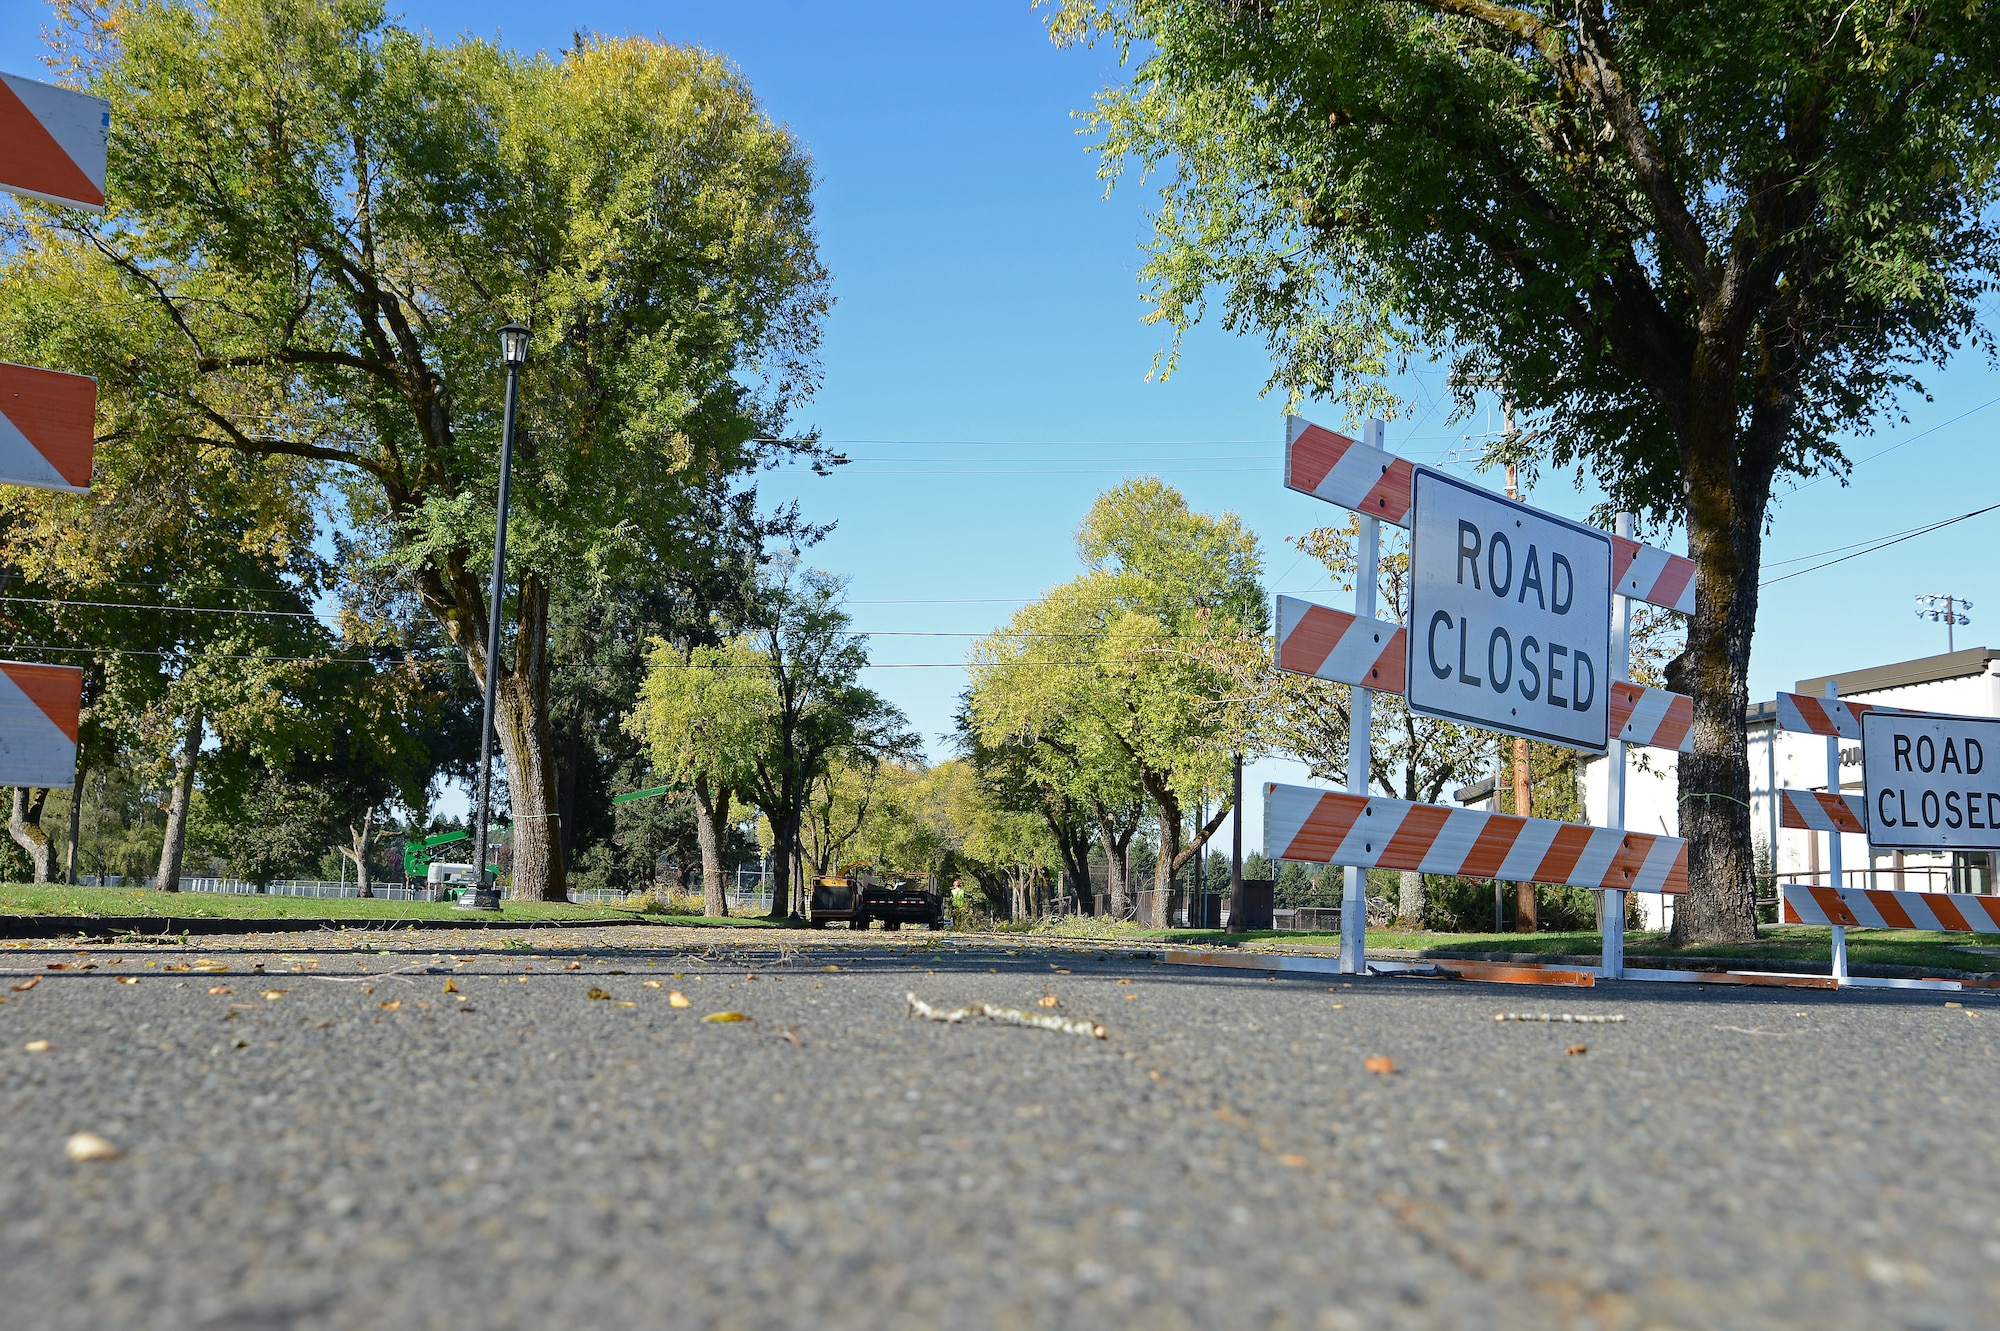 Members of Directorate of Public Works closed parts of Col. Joe Jackson Blvd. during a Historical Reset project Oct. 12, 2018 on McChord Field, Joint Base Lewis McChord, Wash.